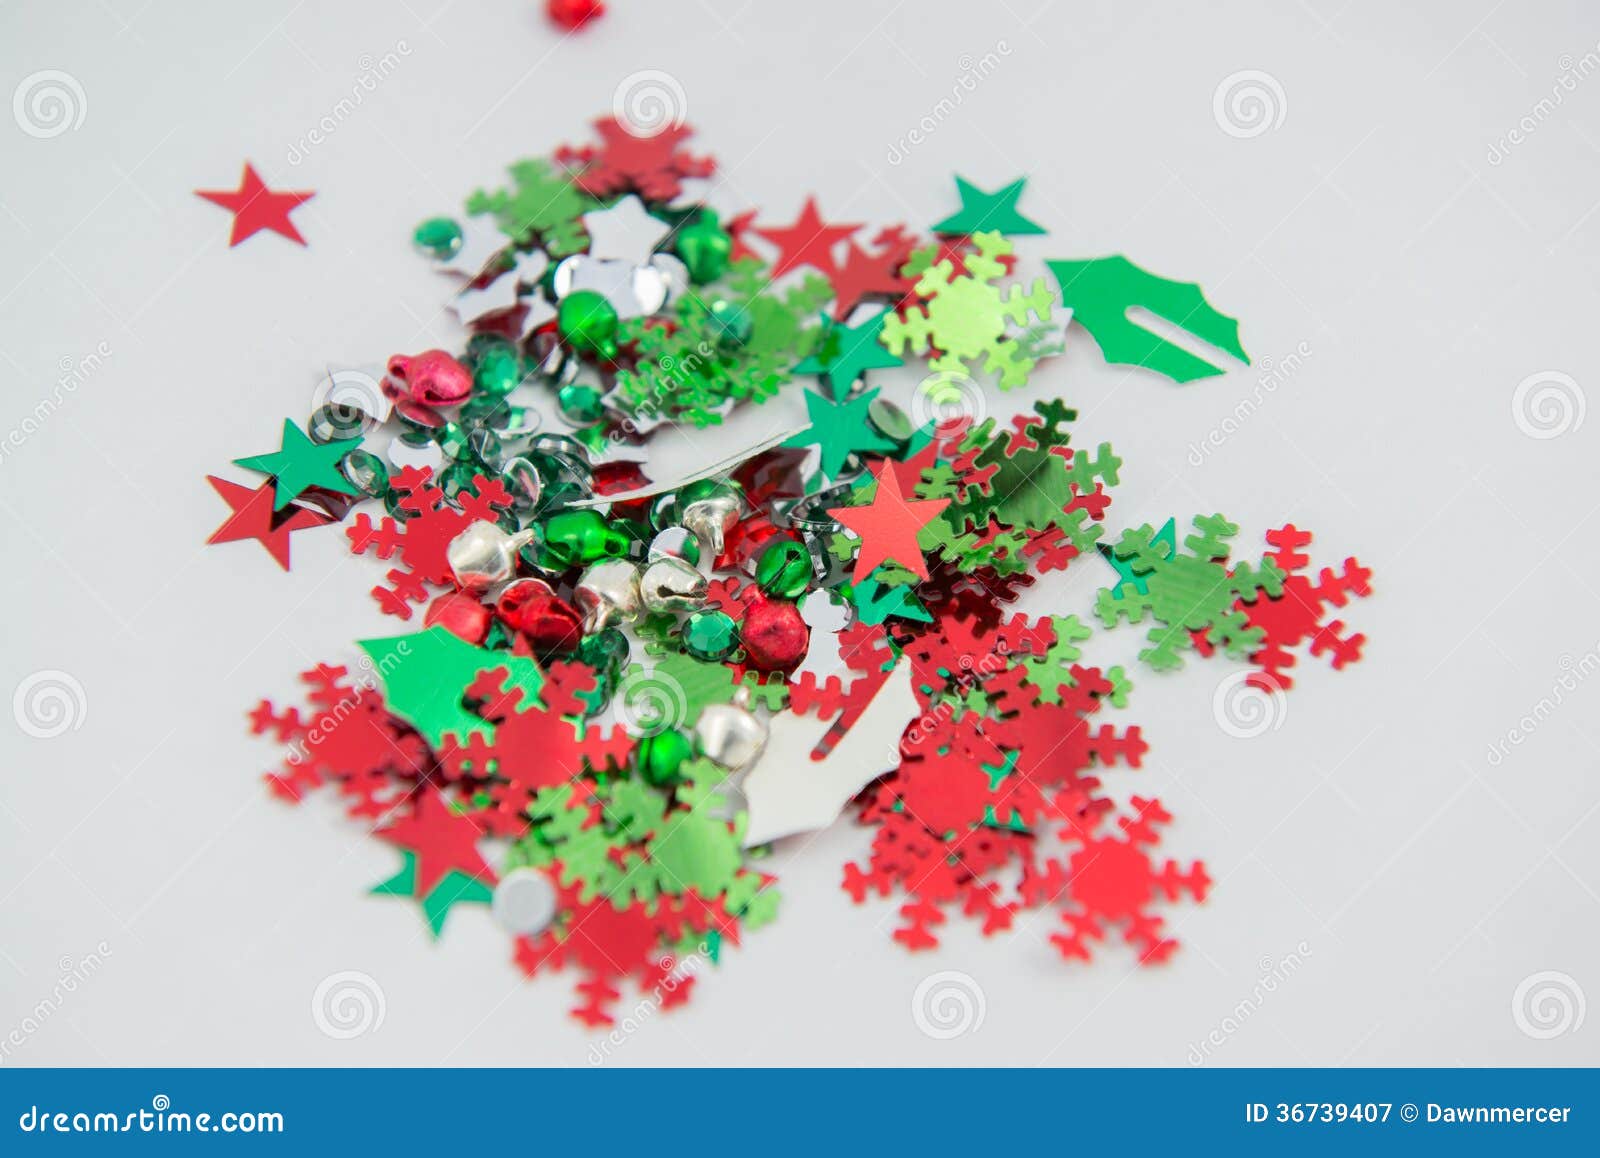 red and green christmas craft embellishments